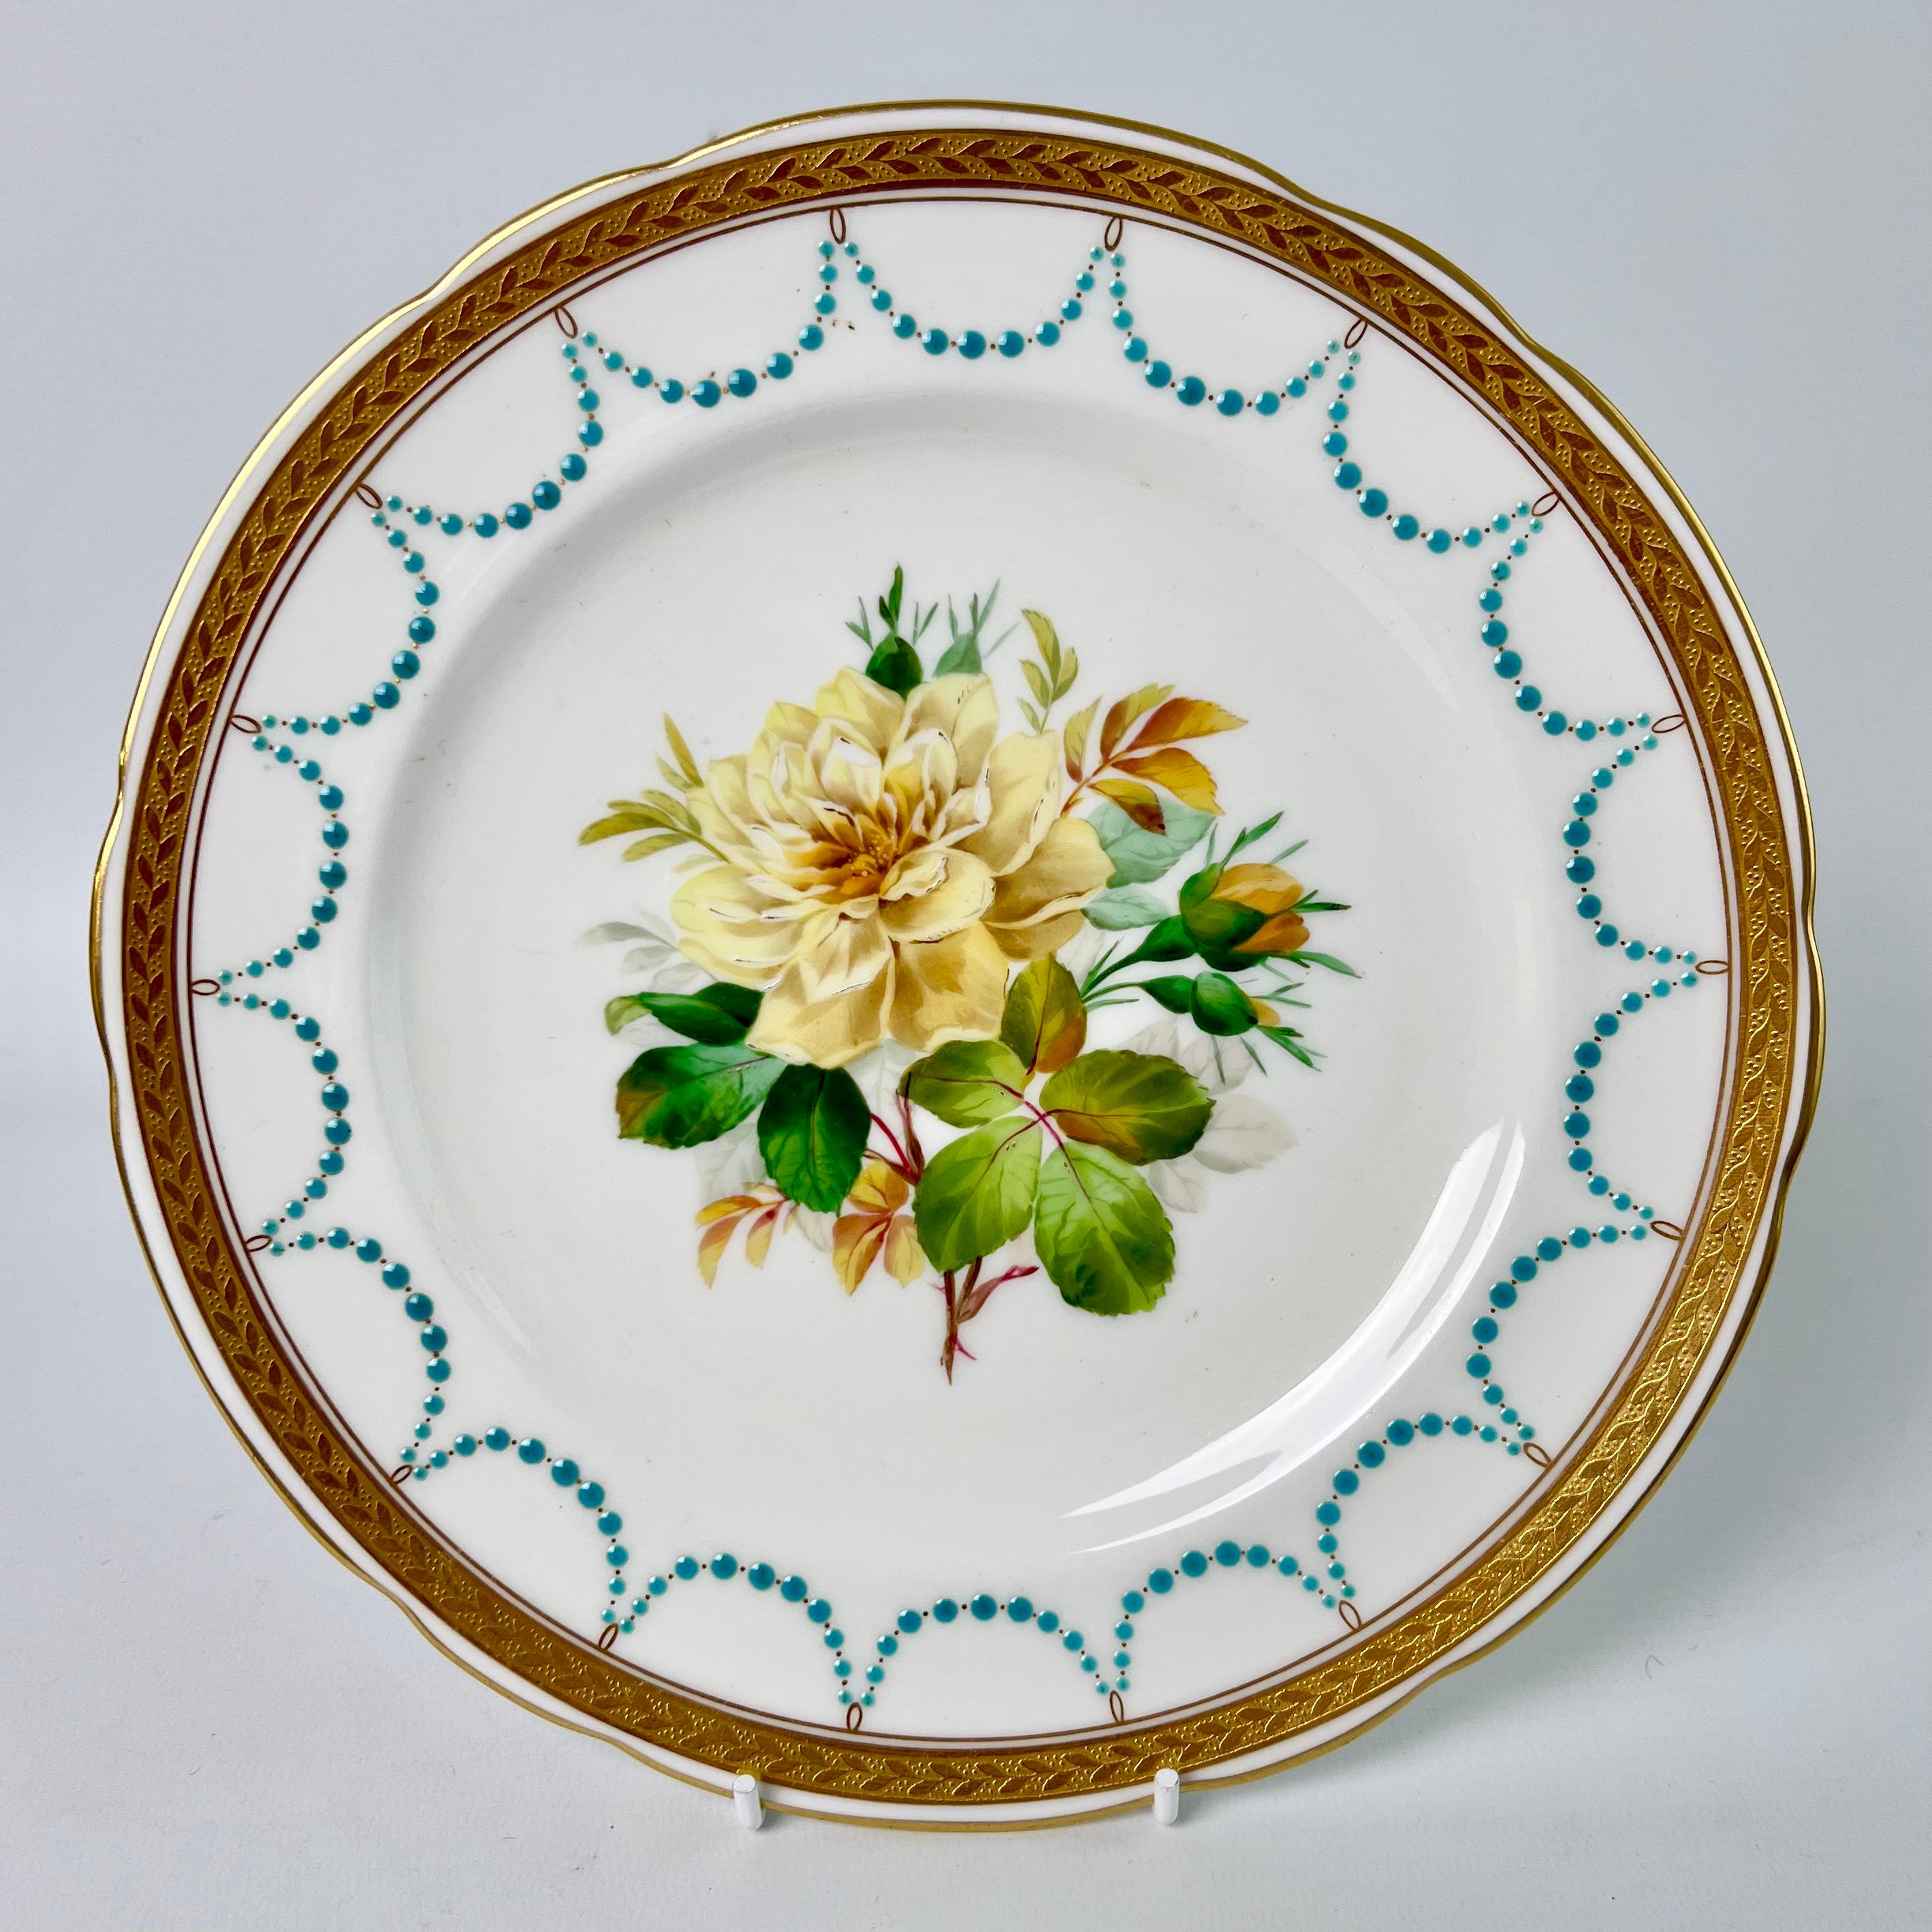 Minton Porcelain Dessert Service, Turquoise and Gilt, Flowers and Fruits, 1870 2